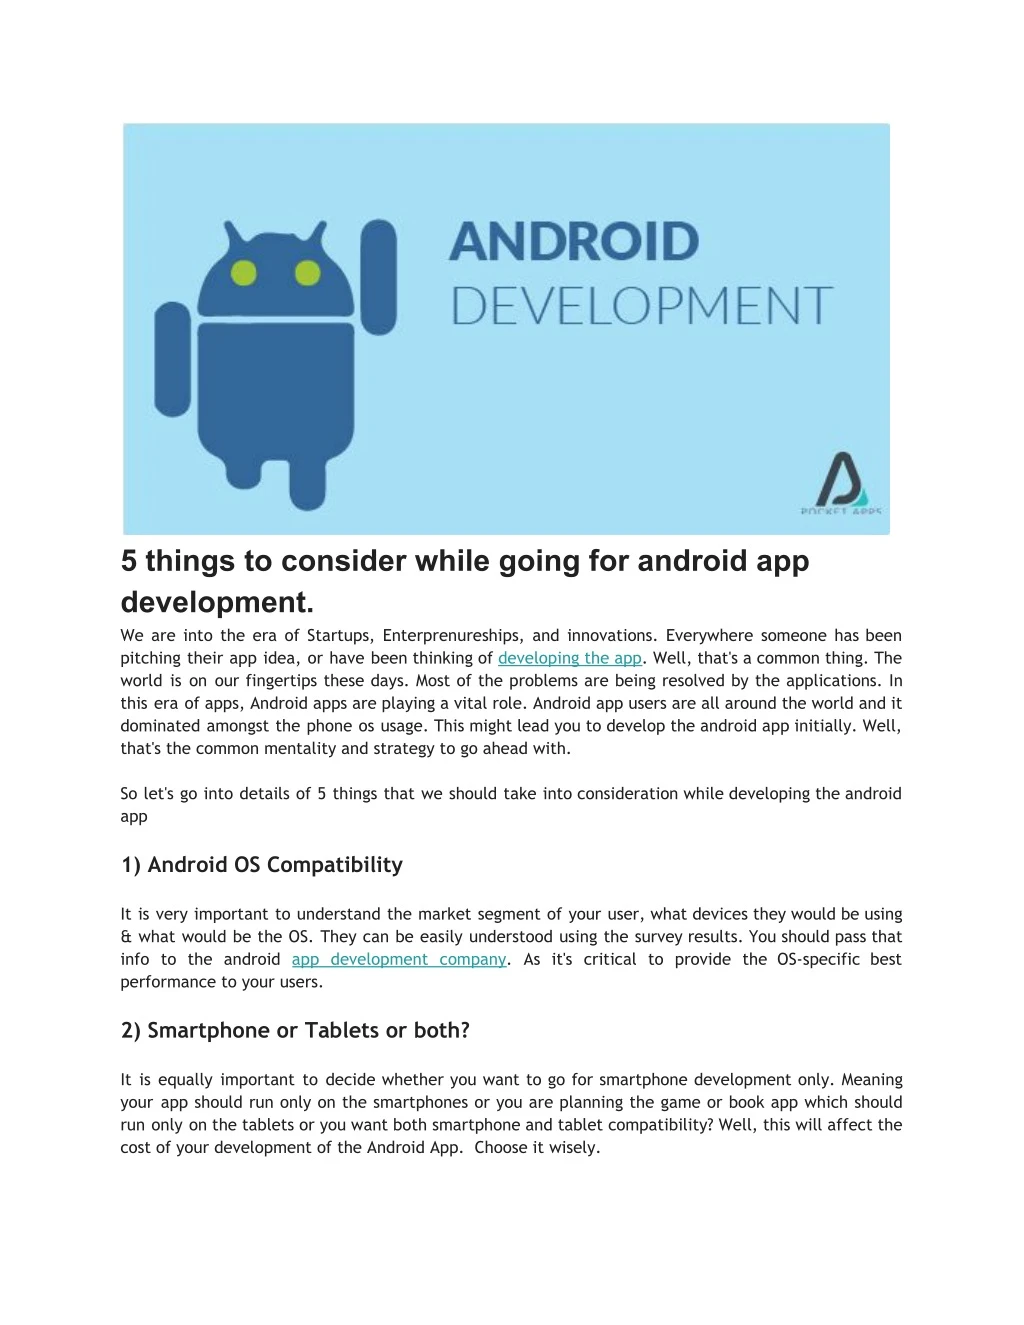 5 things to consider while going for android